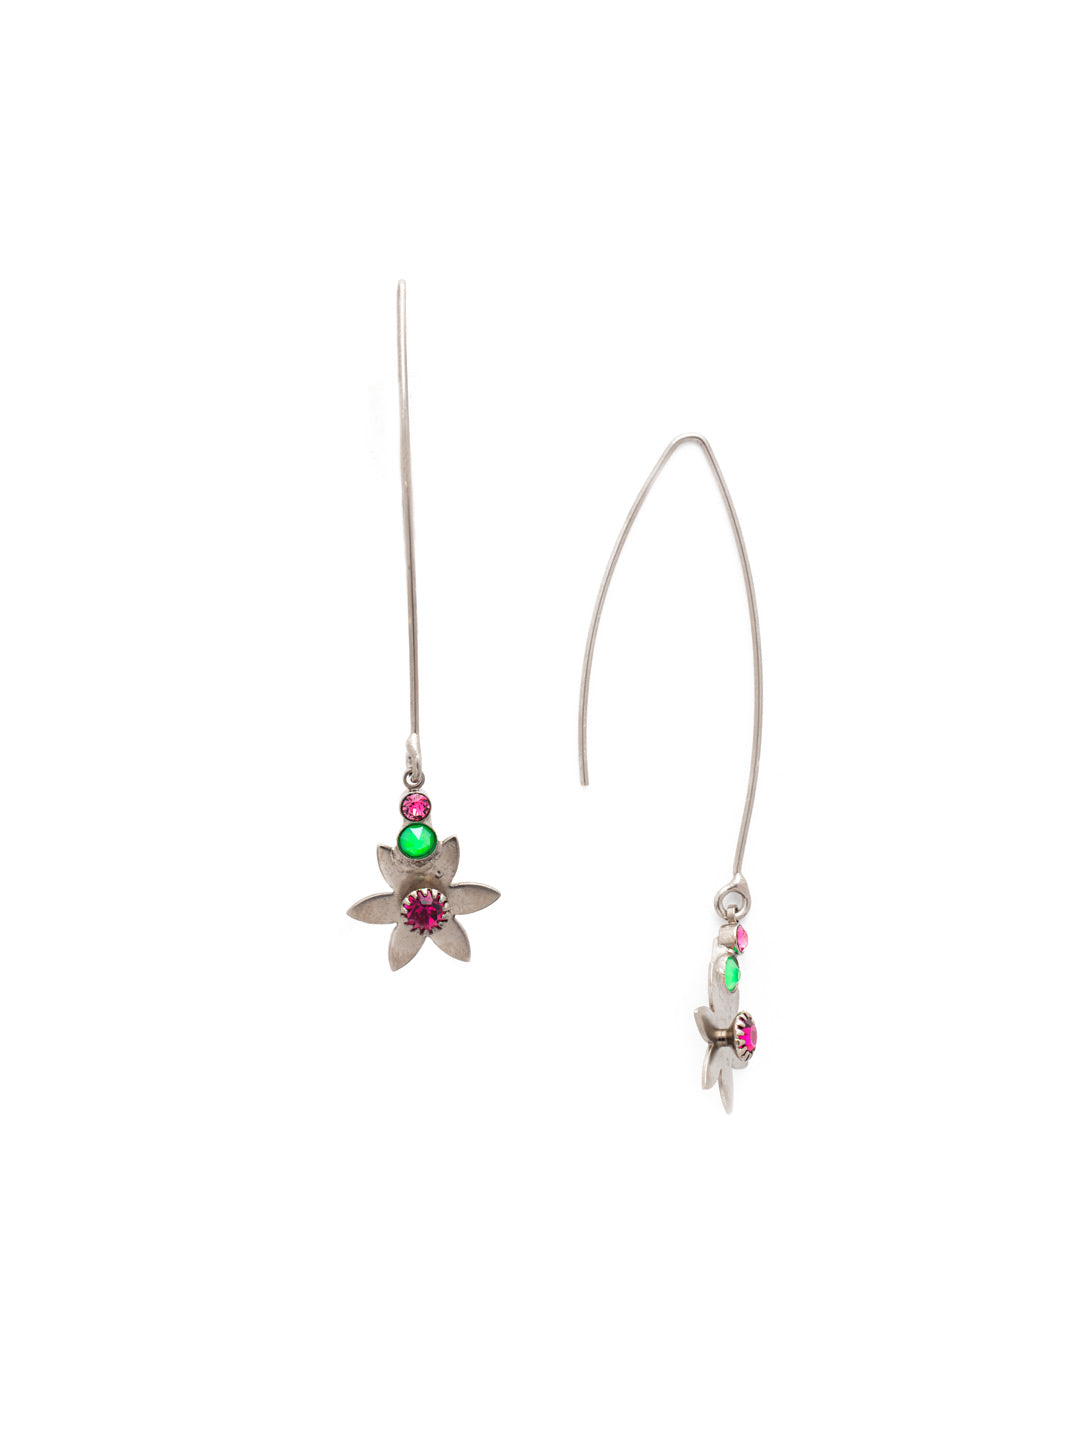 Abella Dangle Earrings - EEV12ASWDW - <p>Wear the Abella Dangle Earrings for a bit of floral, a bit of sparkle, and shiny metalwork, too. They've got it all and are perfect for spring. From Sorrelli's Wild Watermelon collection in our Antique Silver-tone finish.</p>